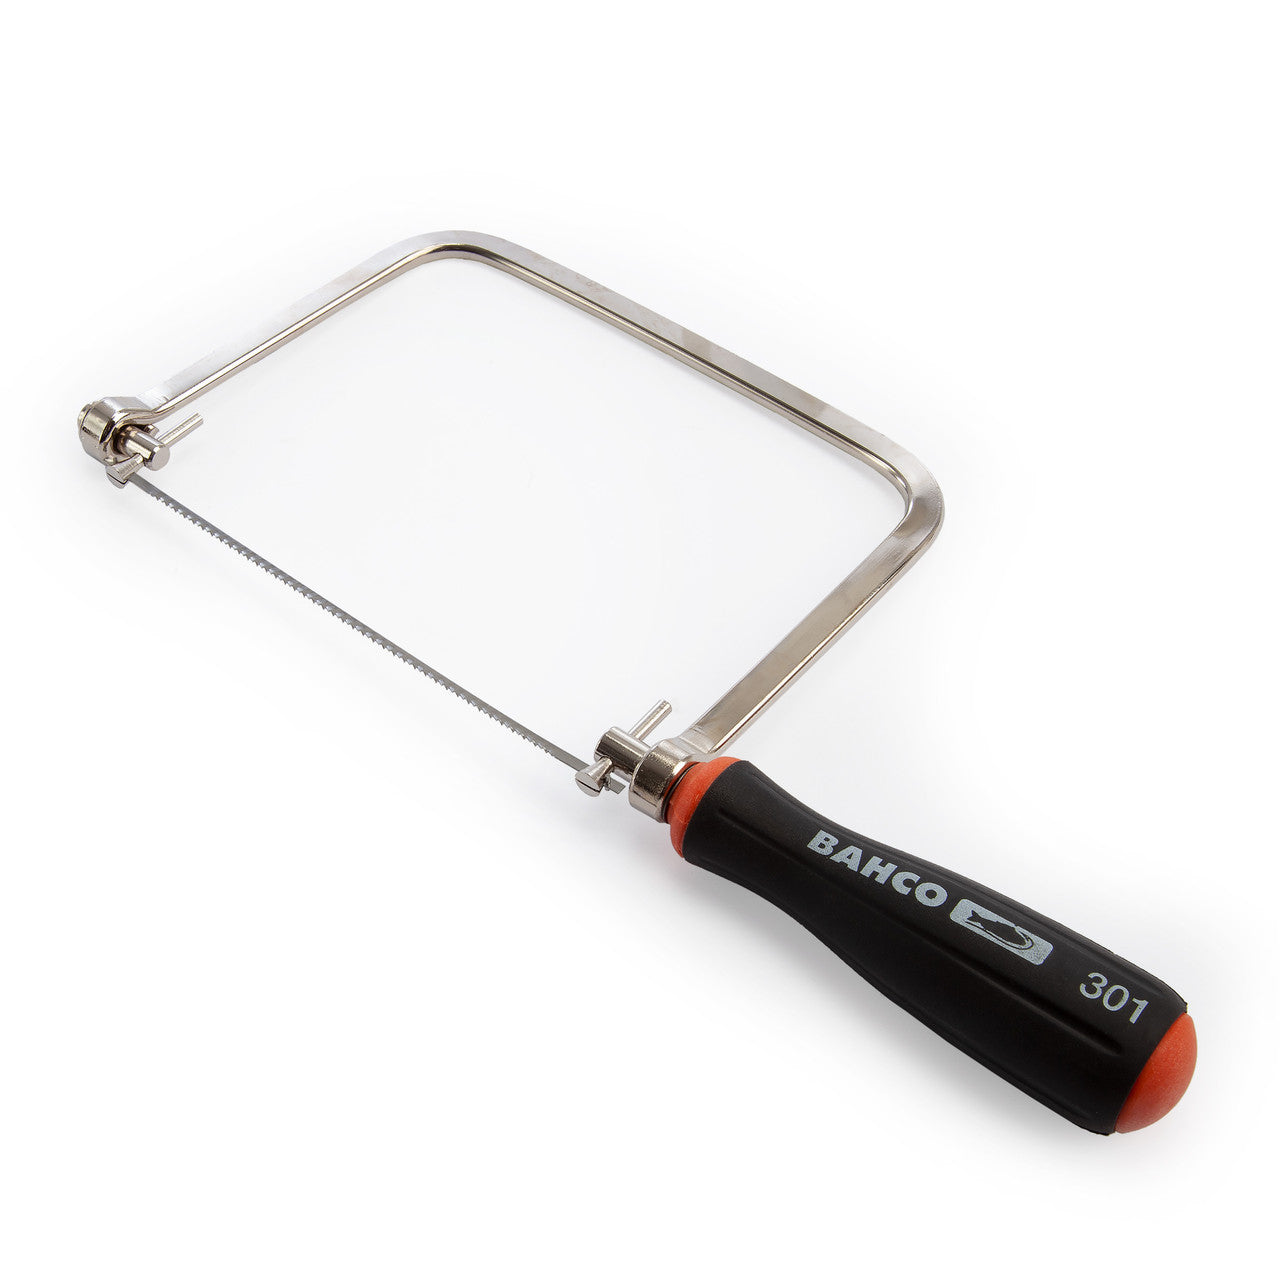 Bahco 301PH Coping Saw with Plastic Handle 165mm (6.5")